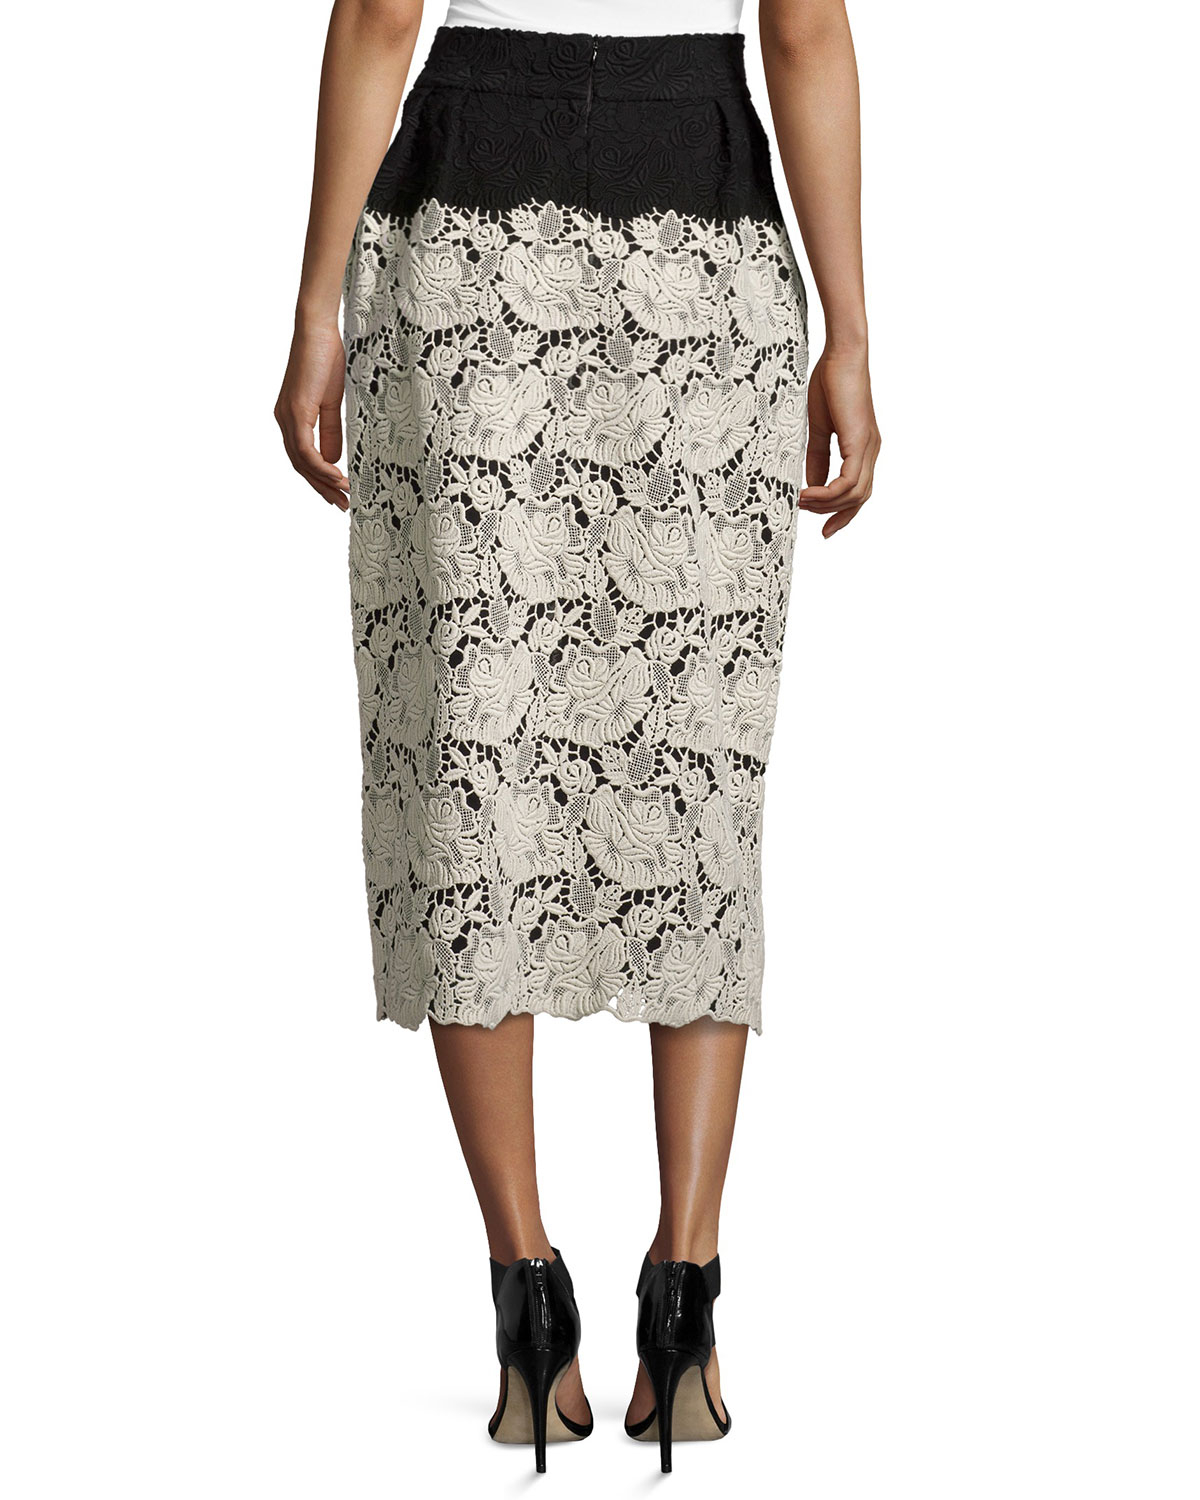 Stella McCartney Two-tone Long Lace Skirt in Floral (Black) - Lyst